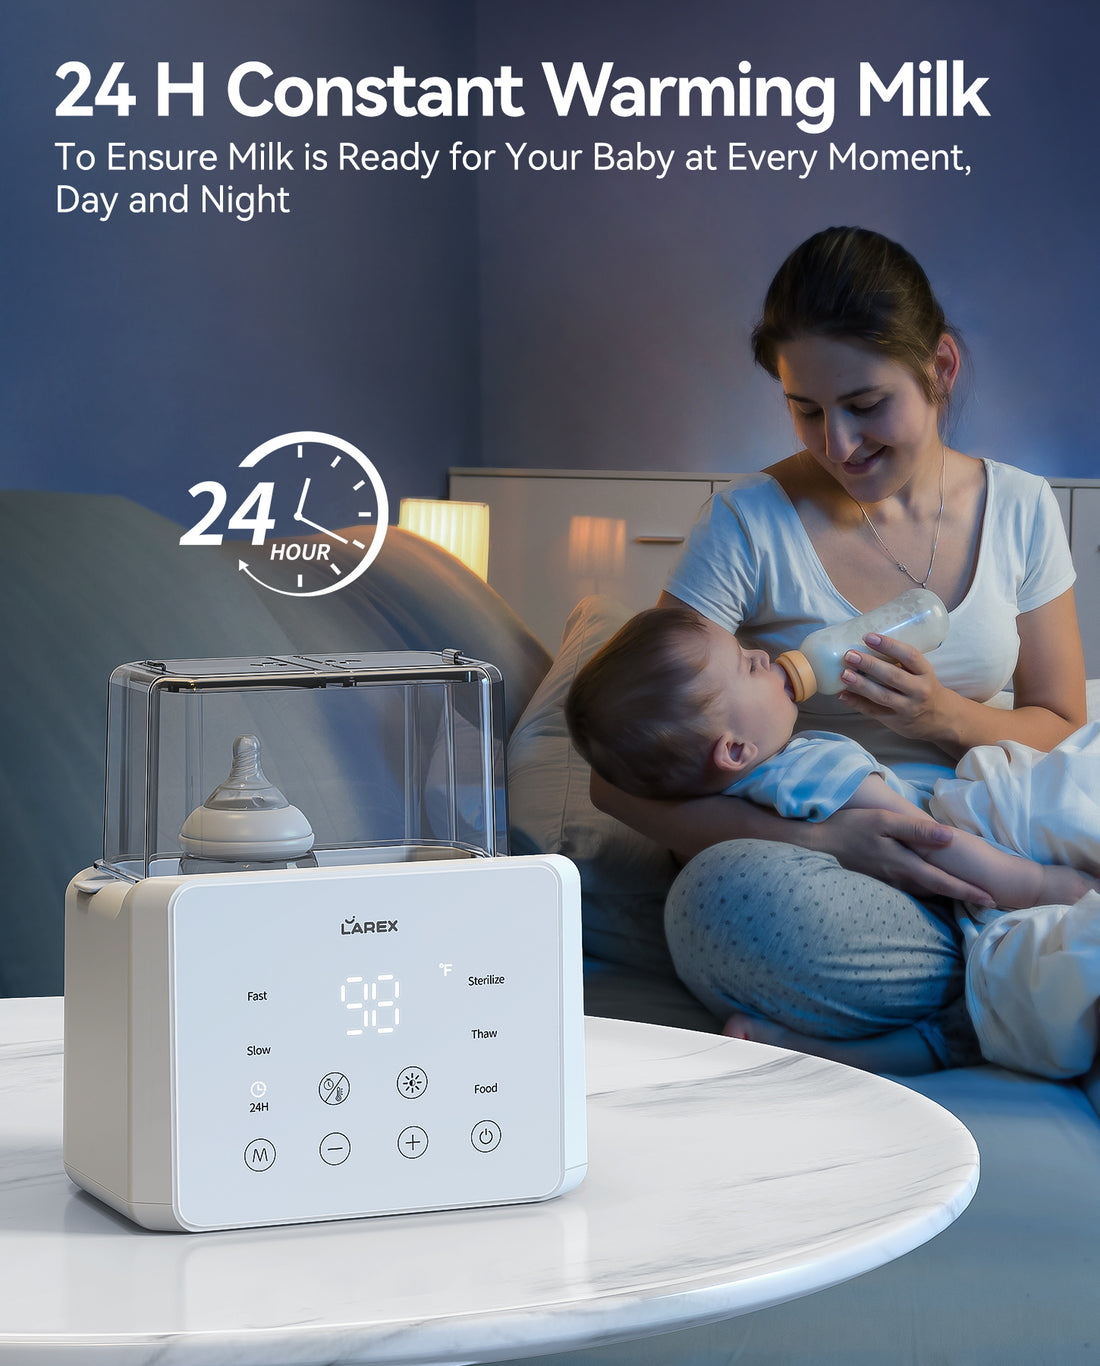 Simplify Nighttime Feedings with LAREX 24H Thermostat System